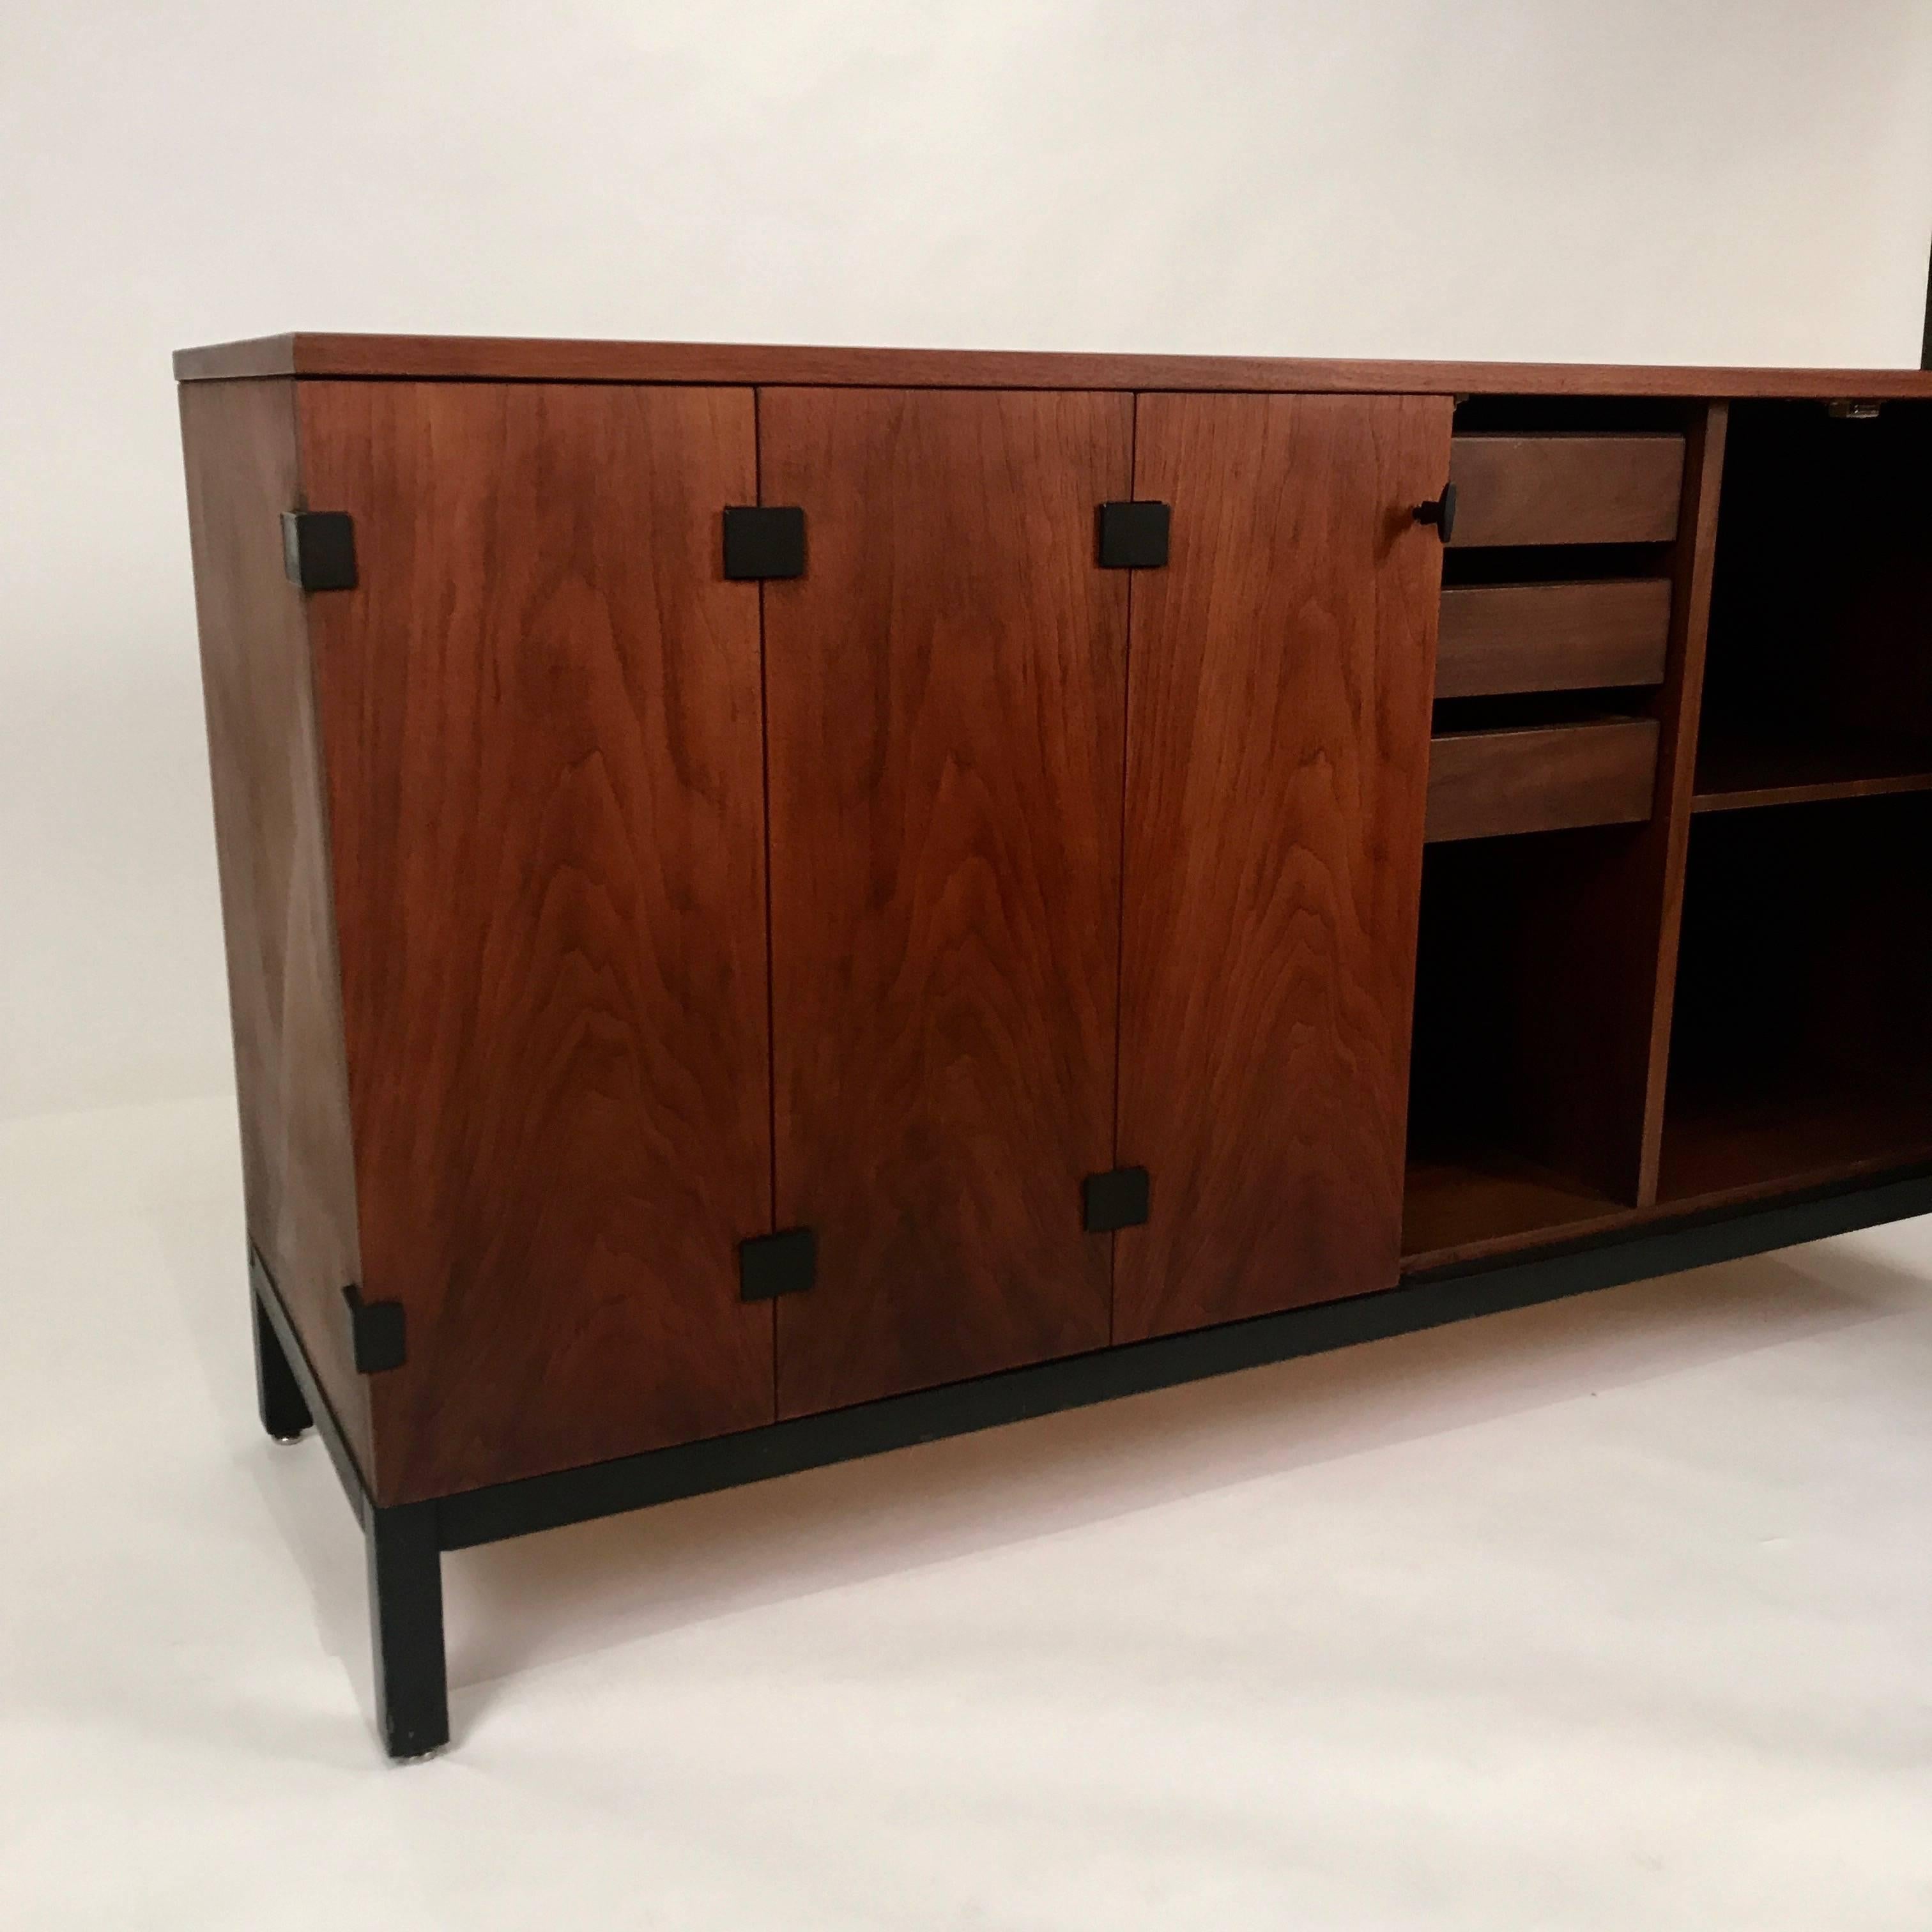 Really great walnut sideboard. Still looks like new. Black iron hardware on stunning tri-fold doors. Interior houses much shelf space and three drawers including a silverware storage drawer.